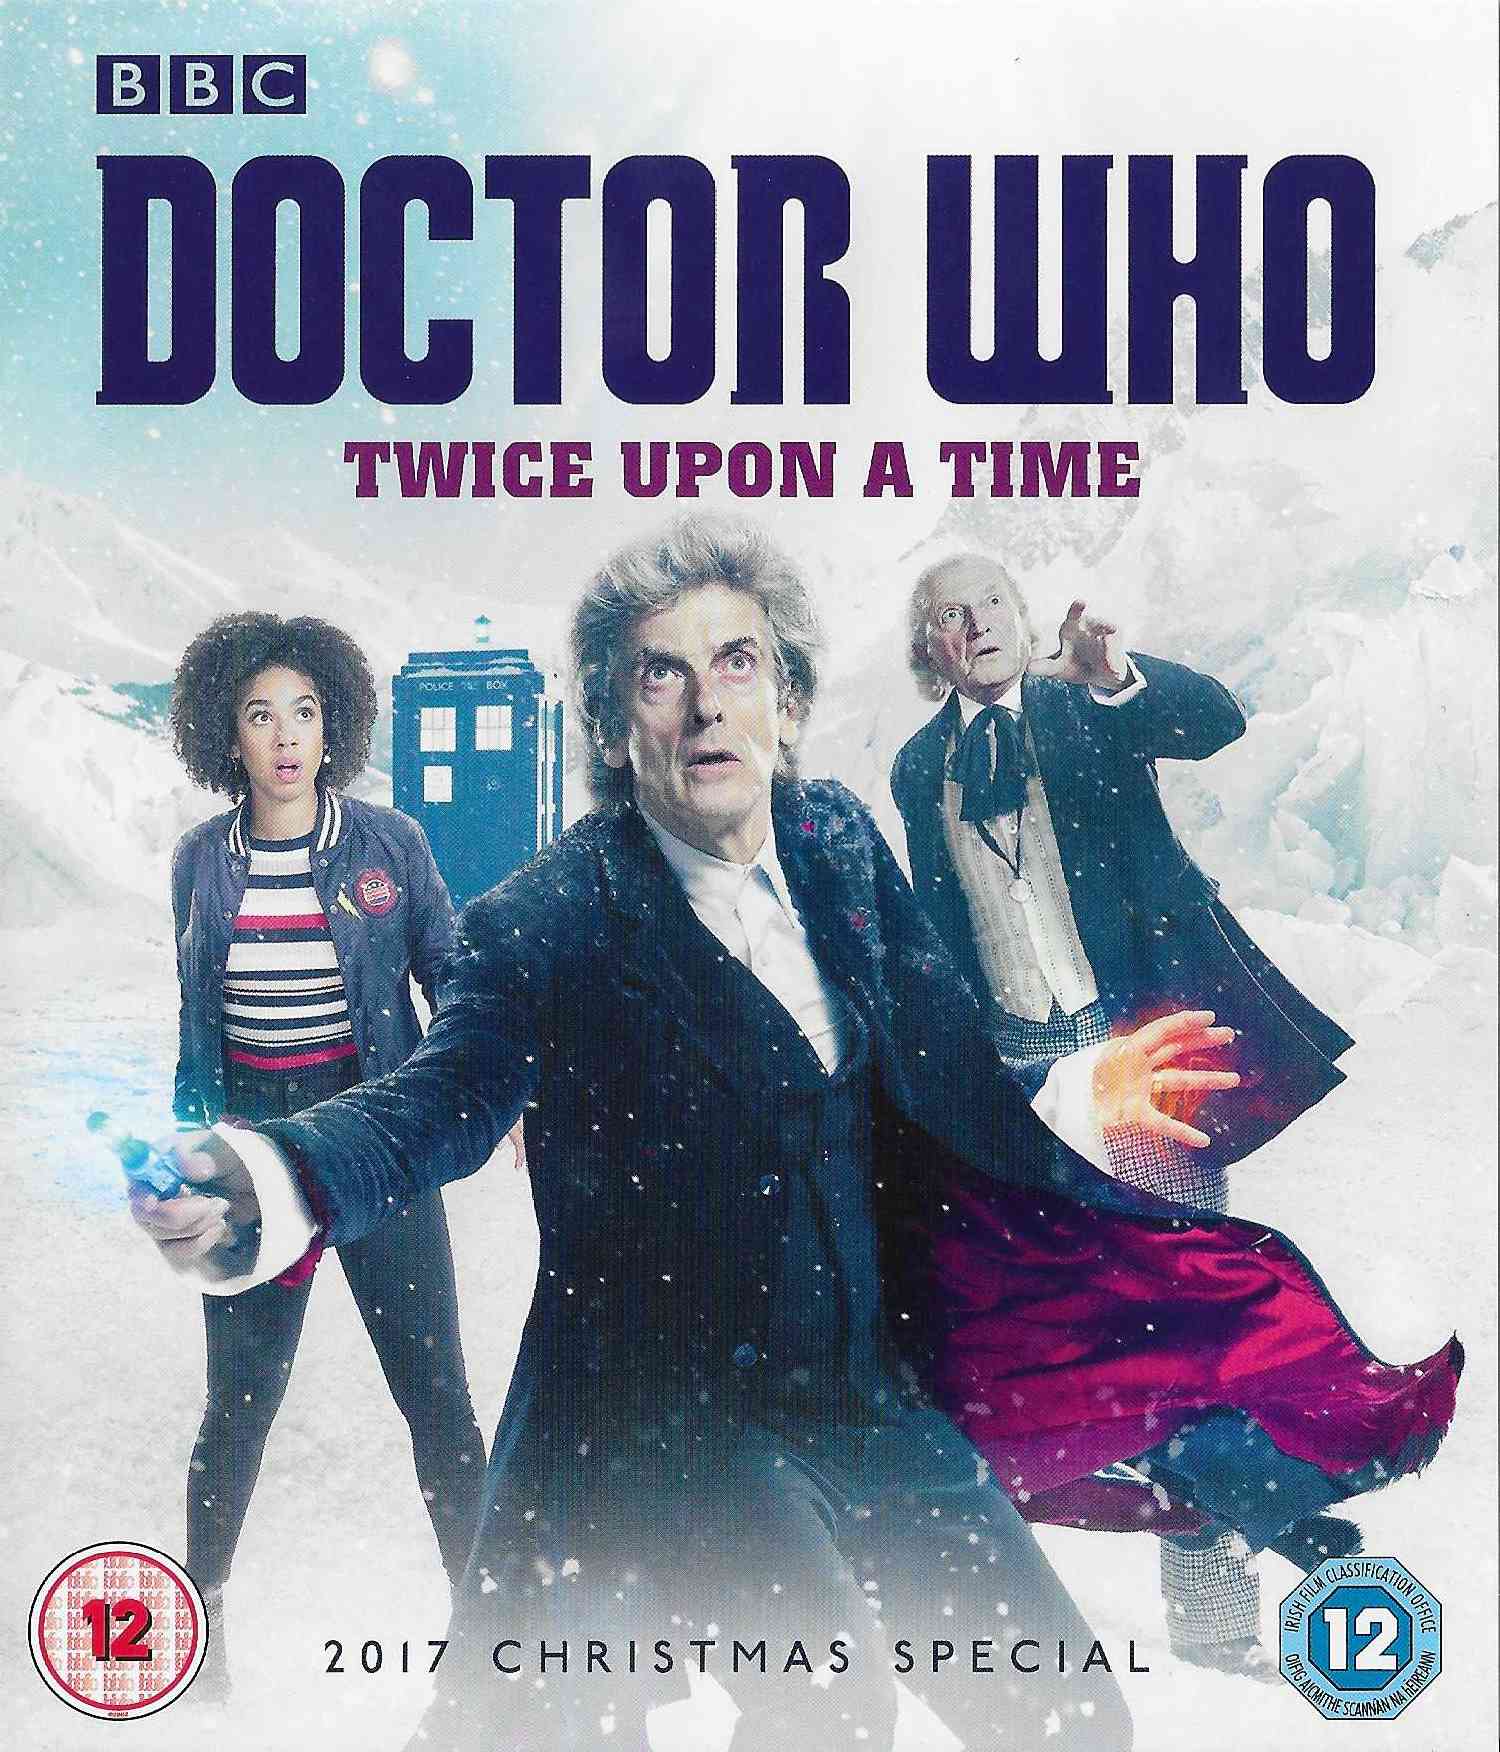 Picture of BBCUHD 0456 Doctor Who - Twice upon a time by artist Stevet Moffat from the BBC 4k_ultrahd - Records and Tapes library